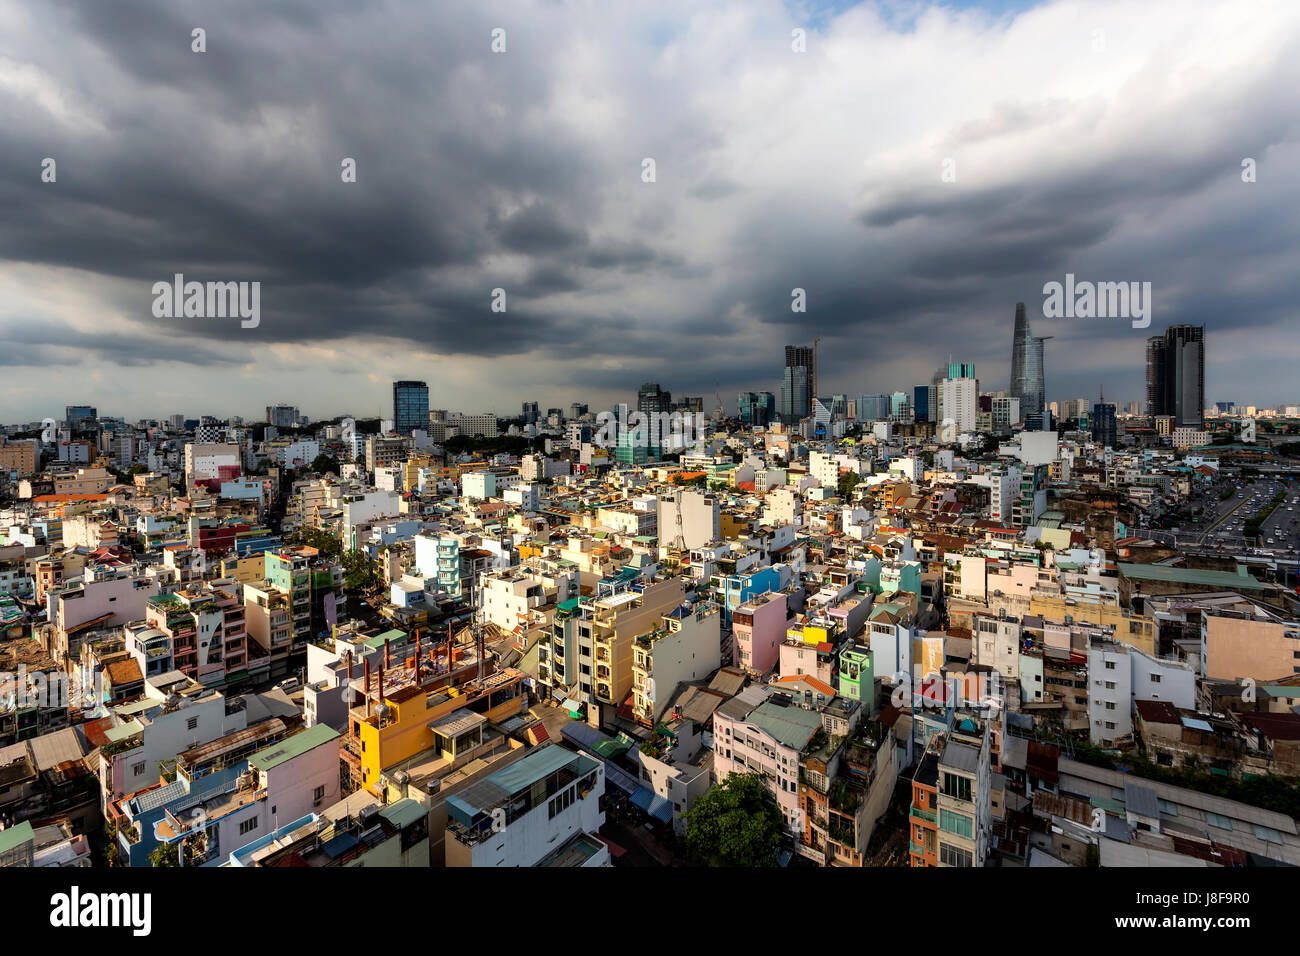 February 2017 - Ho Chi Minh City, Vietnam. View of the colorful rooftops of Saigon on a stormy day. Stock Photo